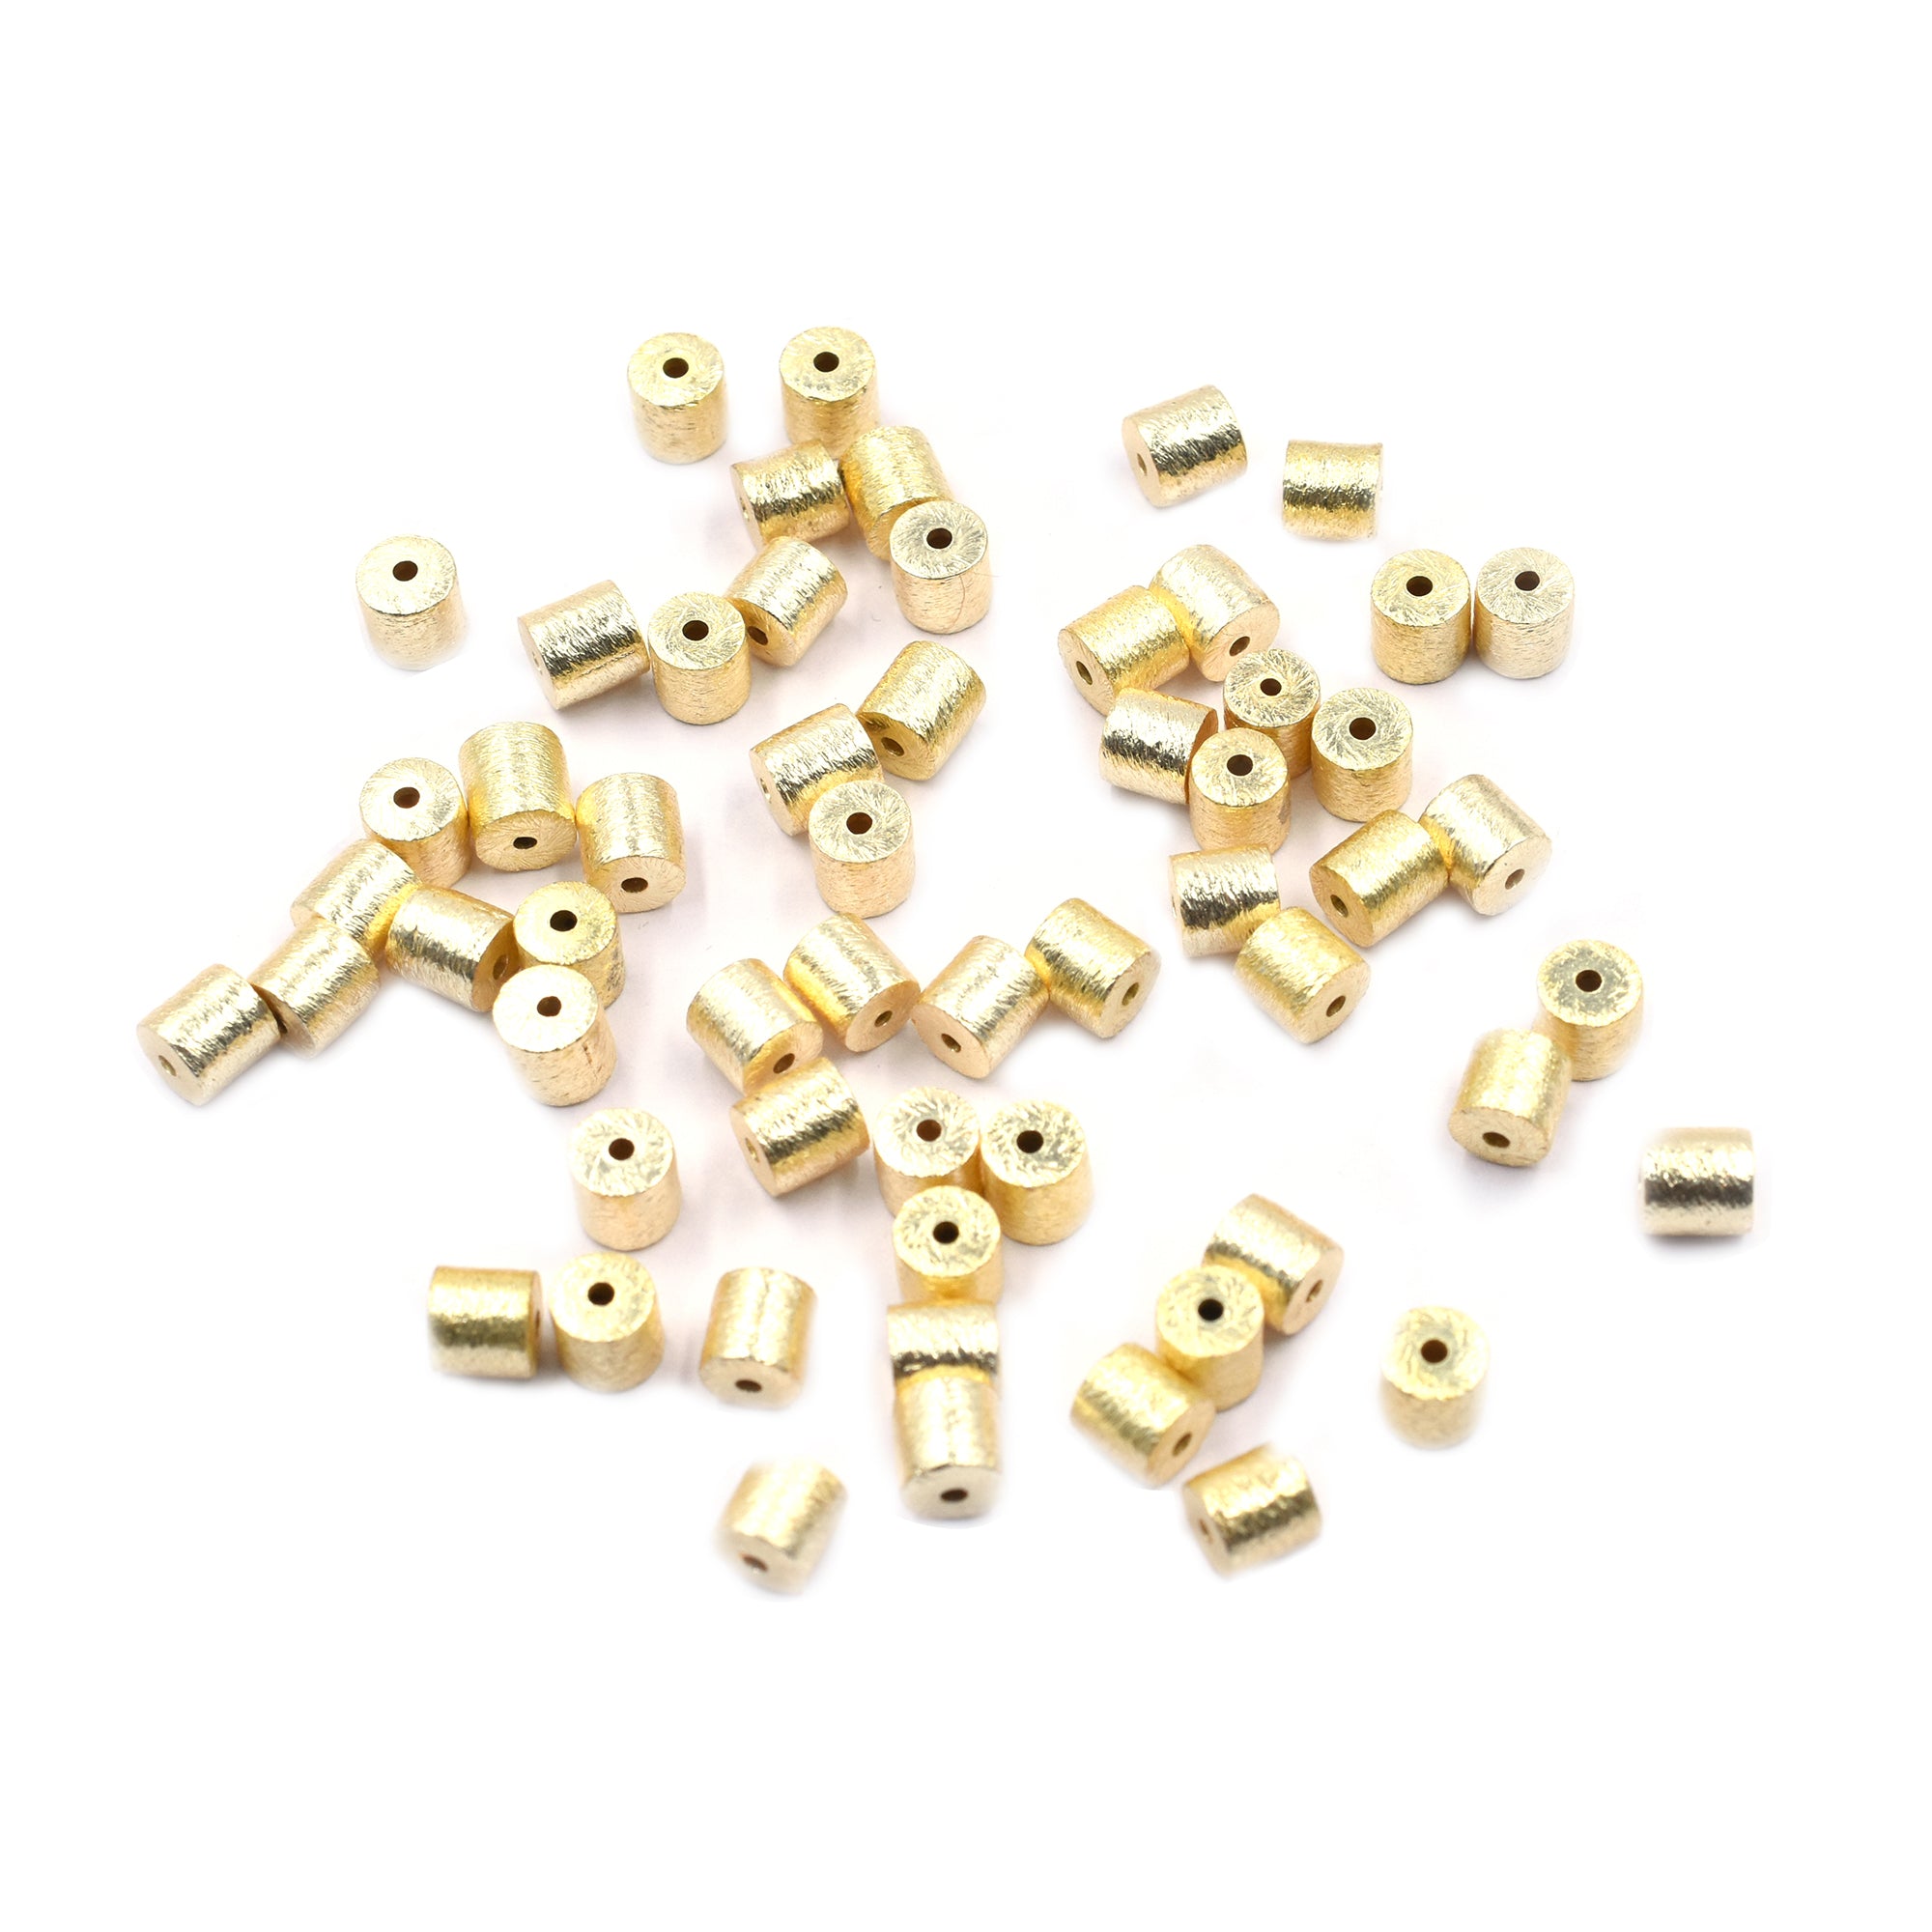 20 Pcs 6X6mm Cylinder Brushed Matte Finish Beads Gold Plated Copper